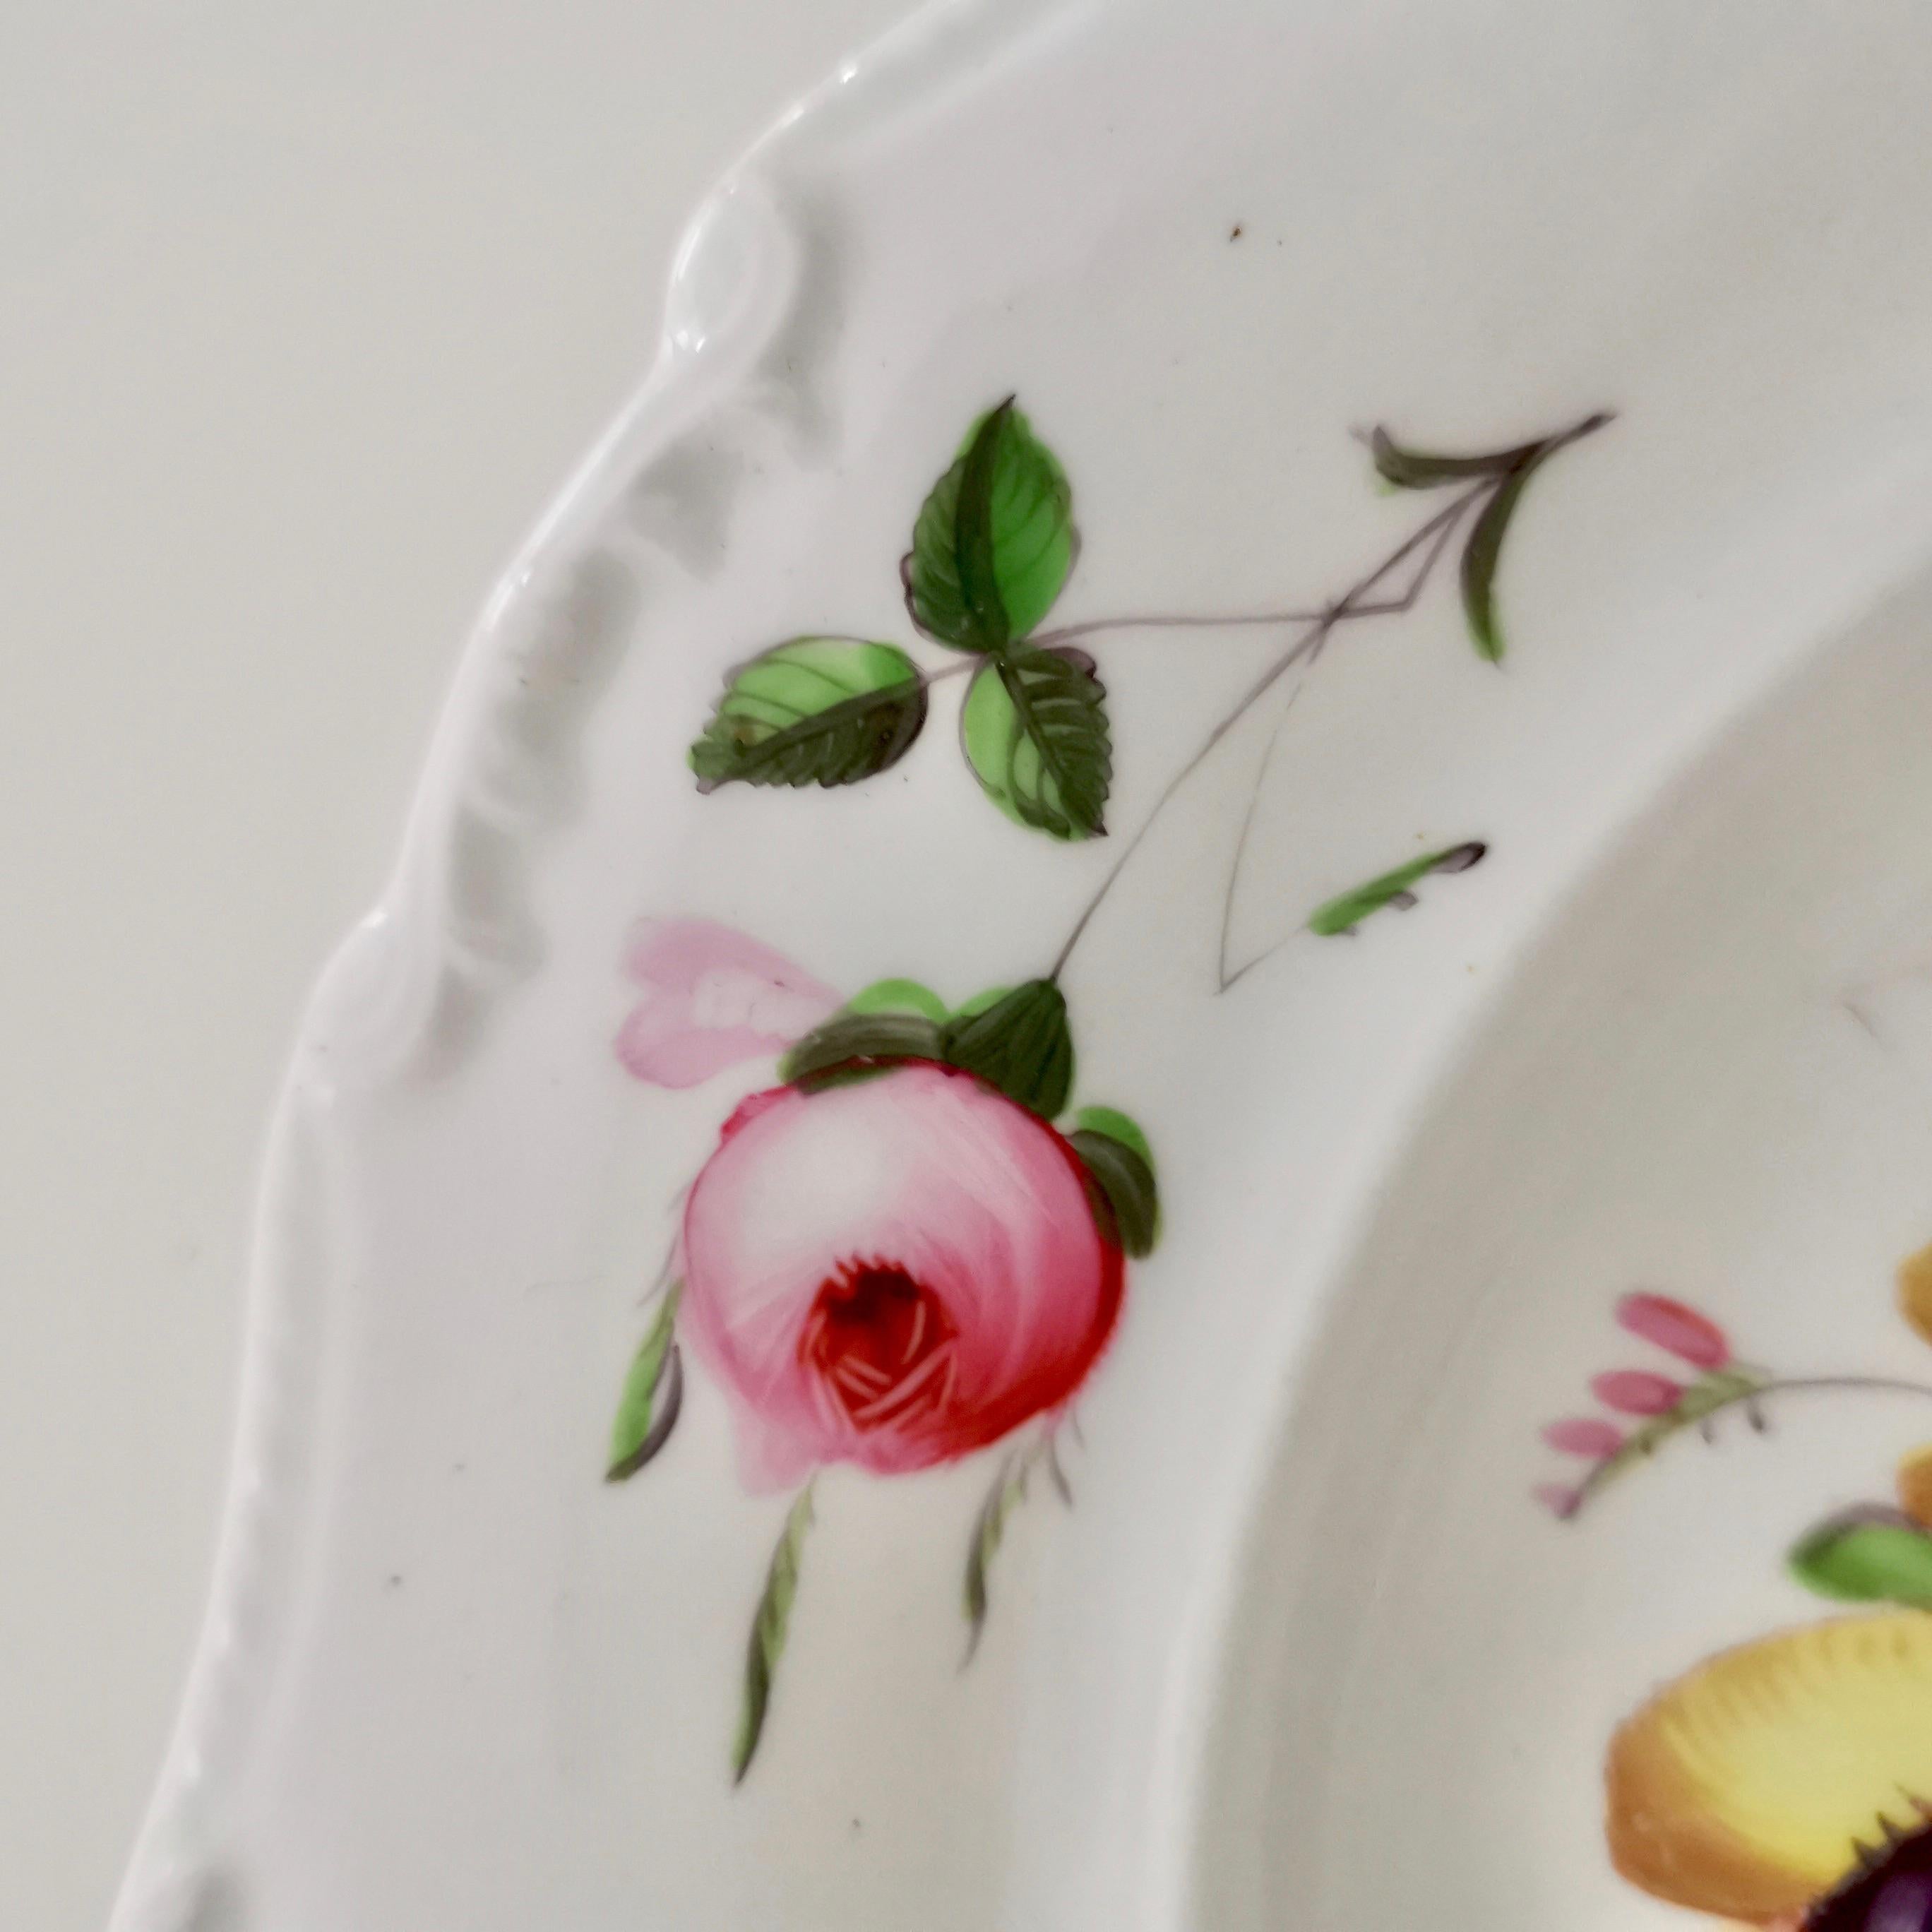 New Hall Porcelain Plate, White with Flowers, Inverted Shell, Regency circa 1820 2